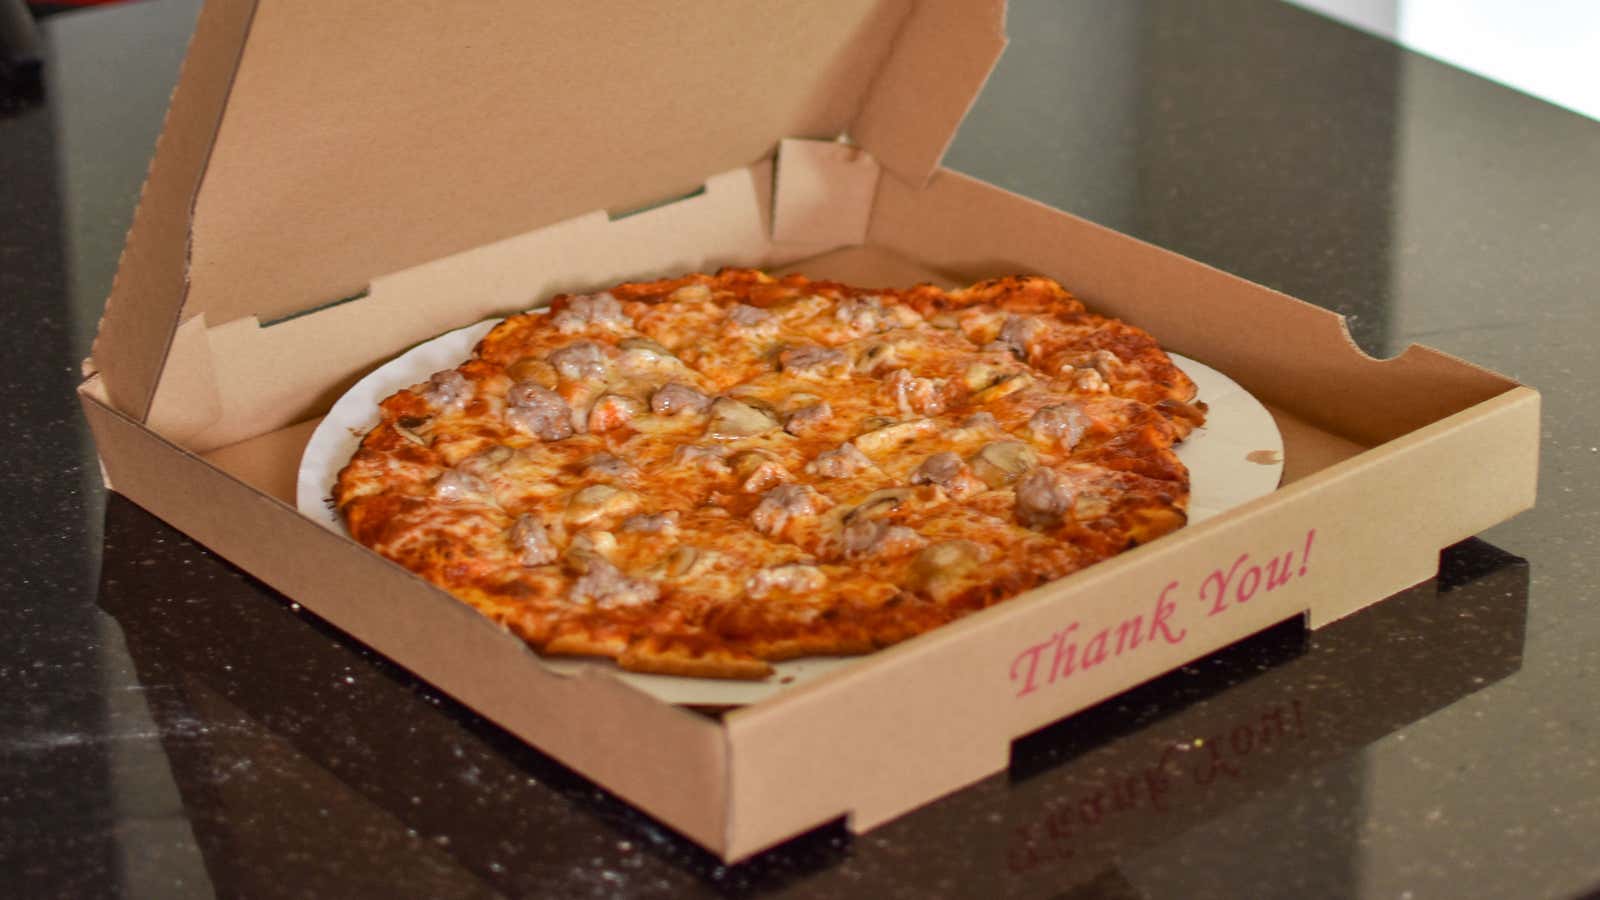 Yes, you can buy cardboard pizza boxes for home use